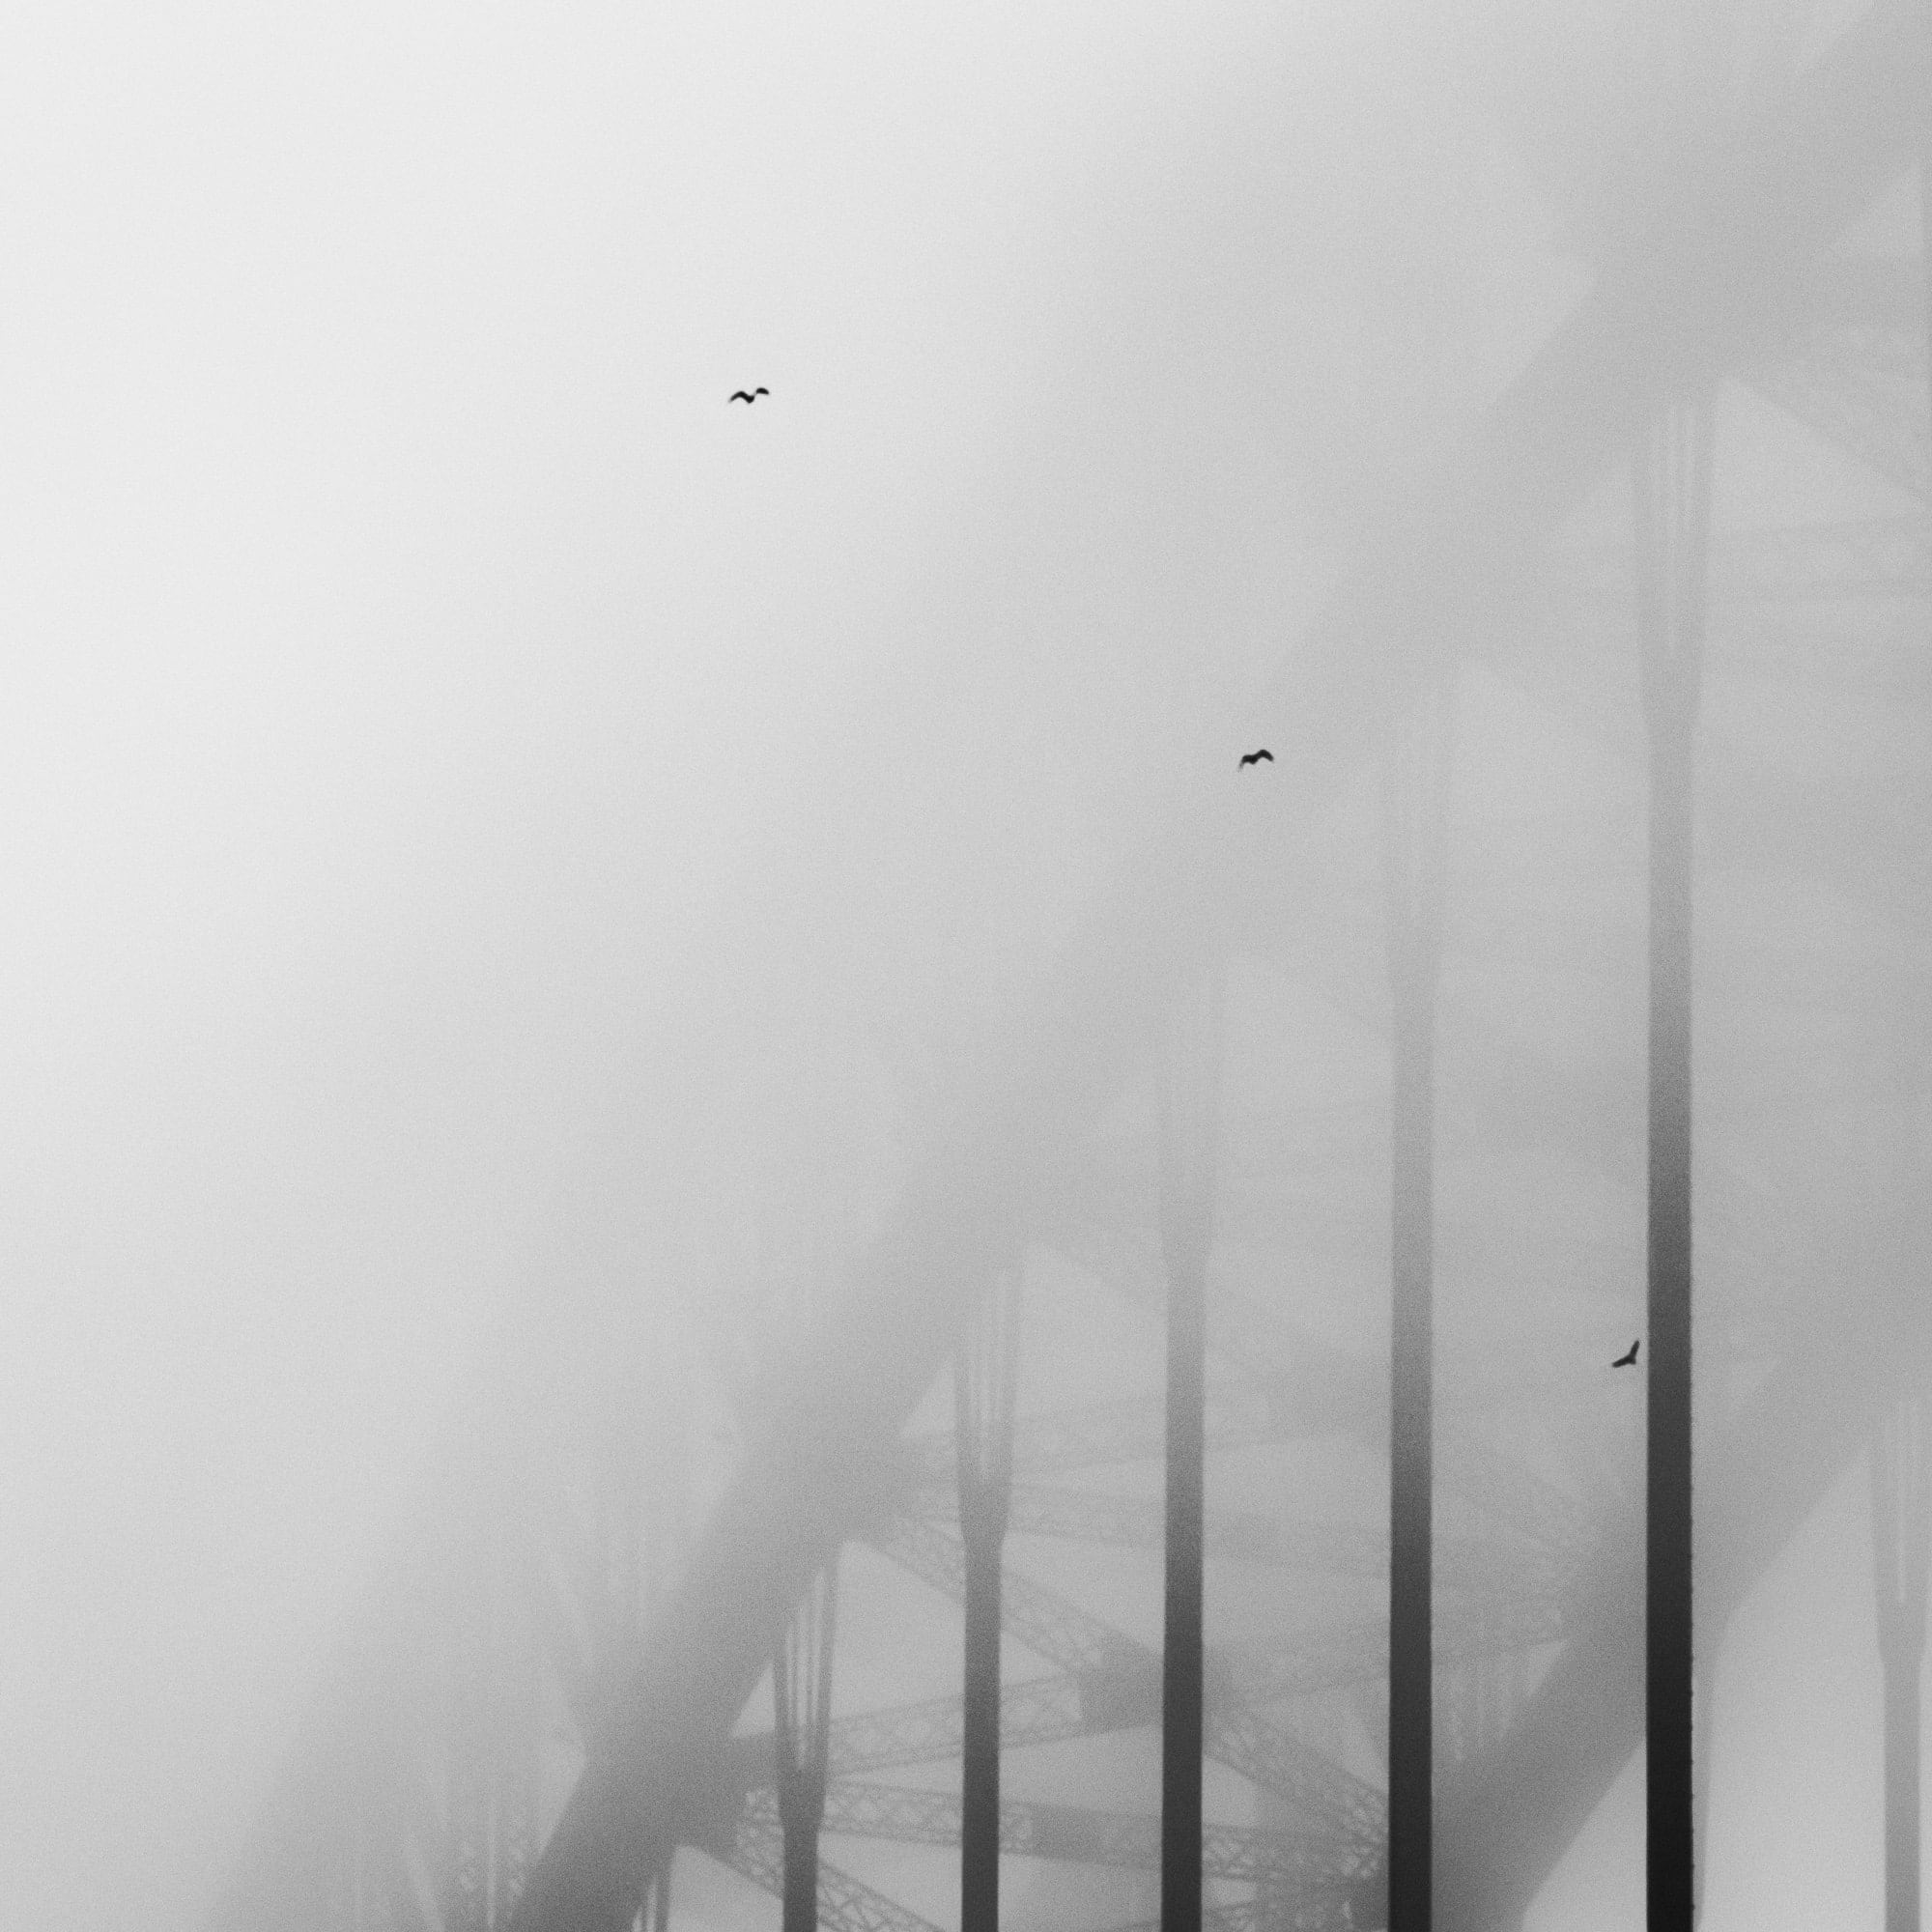 Black and white image of two birds flying amidst the obscured metalwork of the Sydney Harbour Bridge in heavy fog.